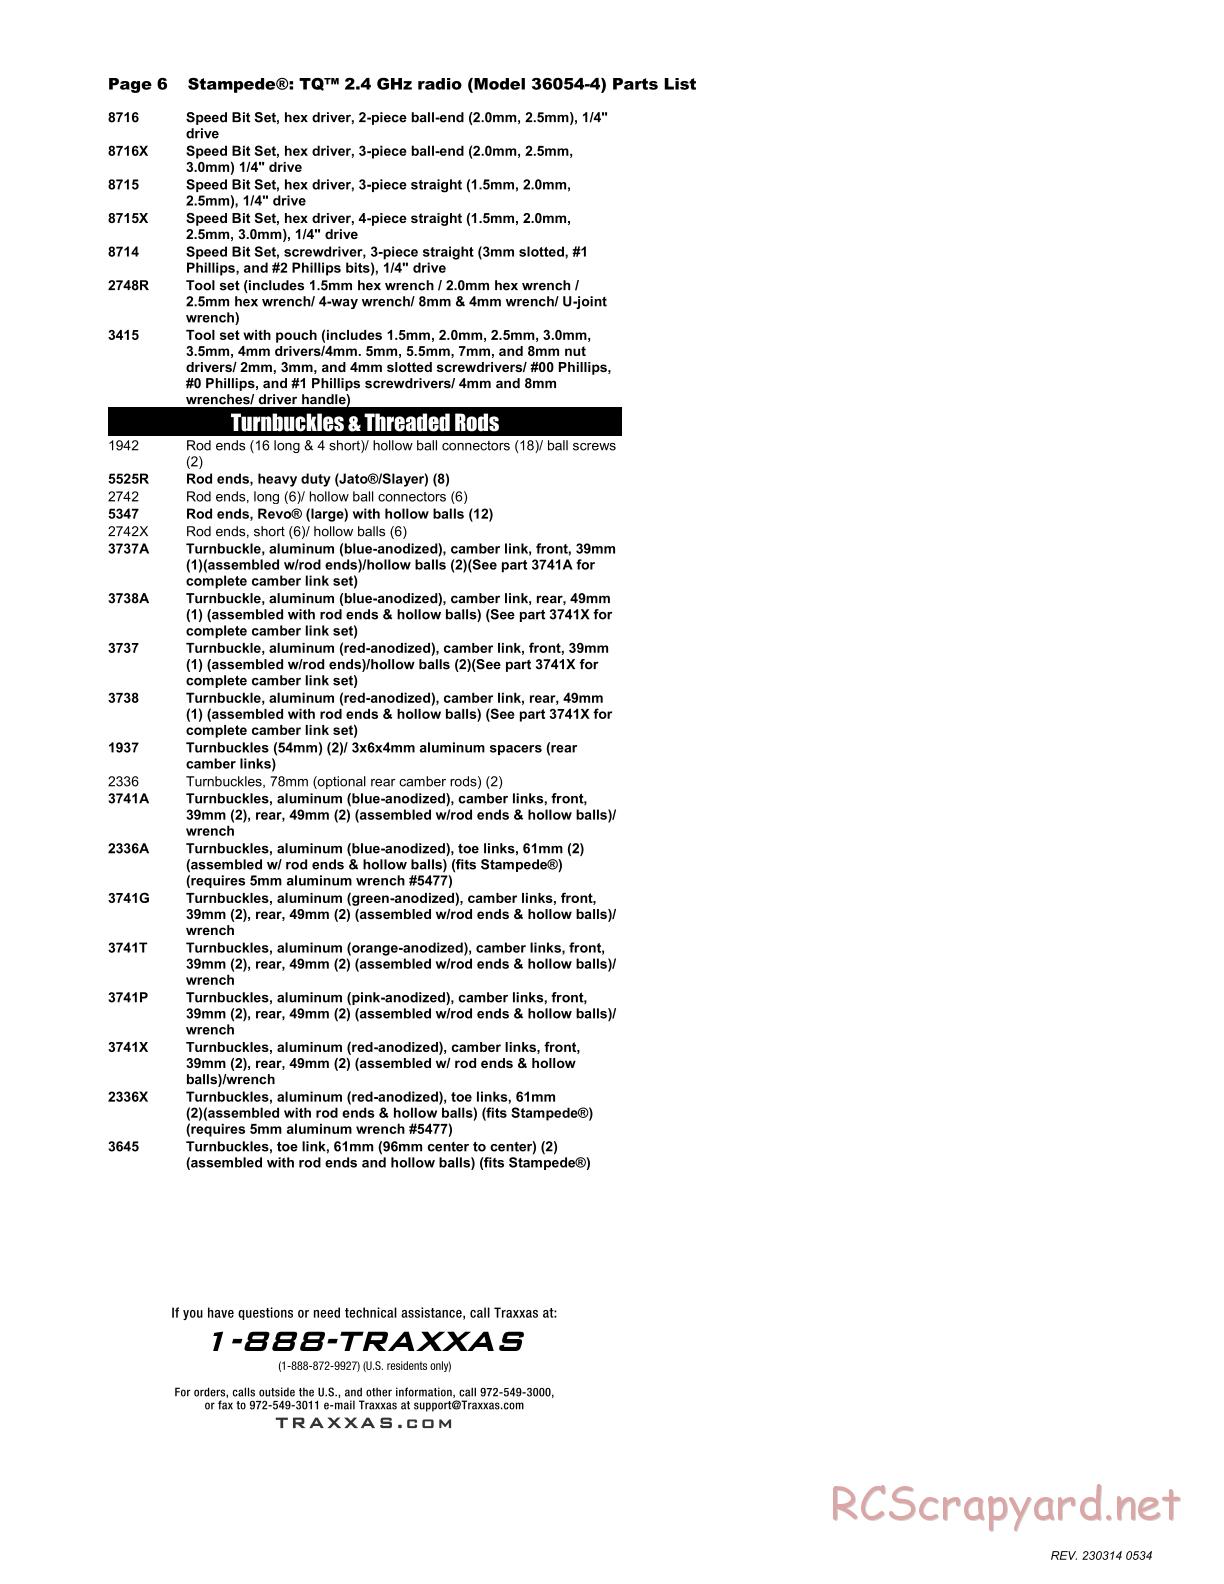 Traxxas - Stampede XL-5 (2018) - Parts List - Page 6